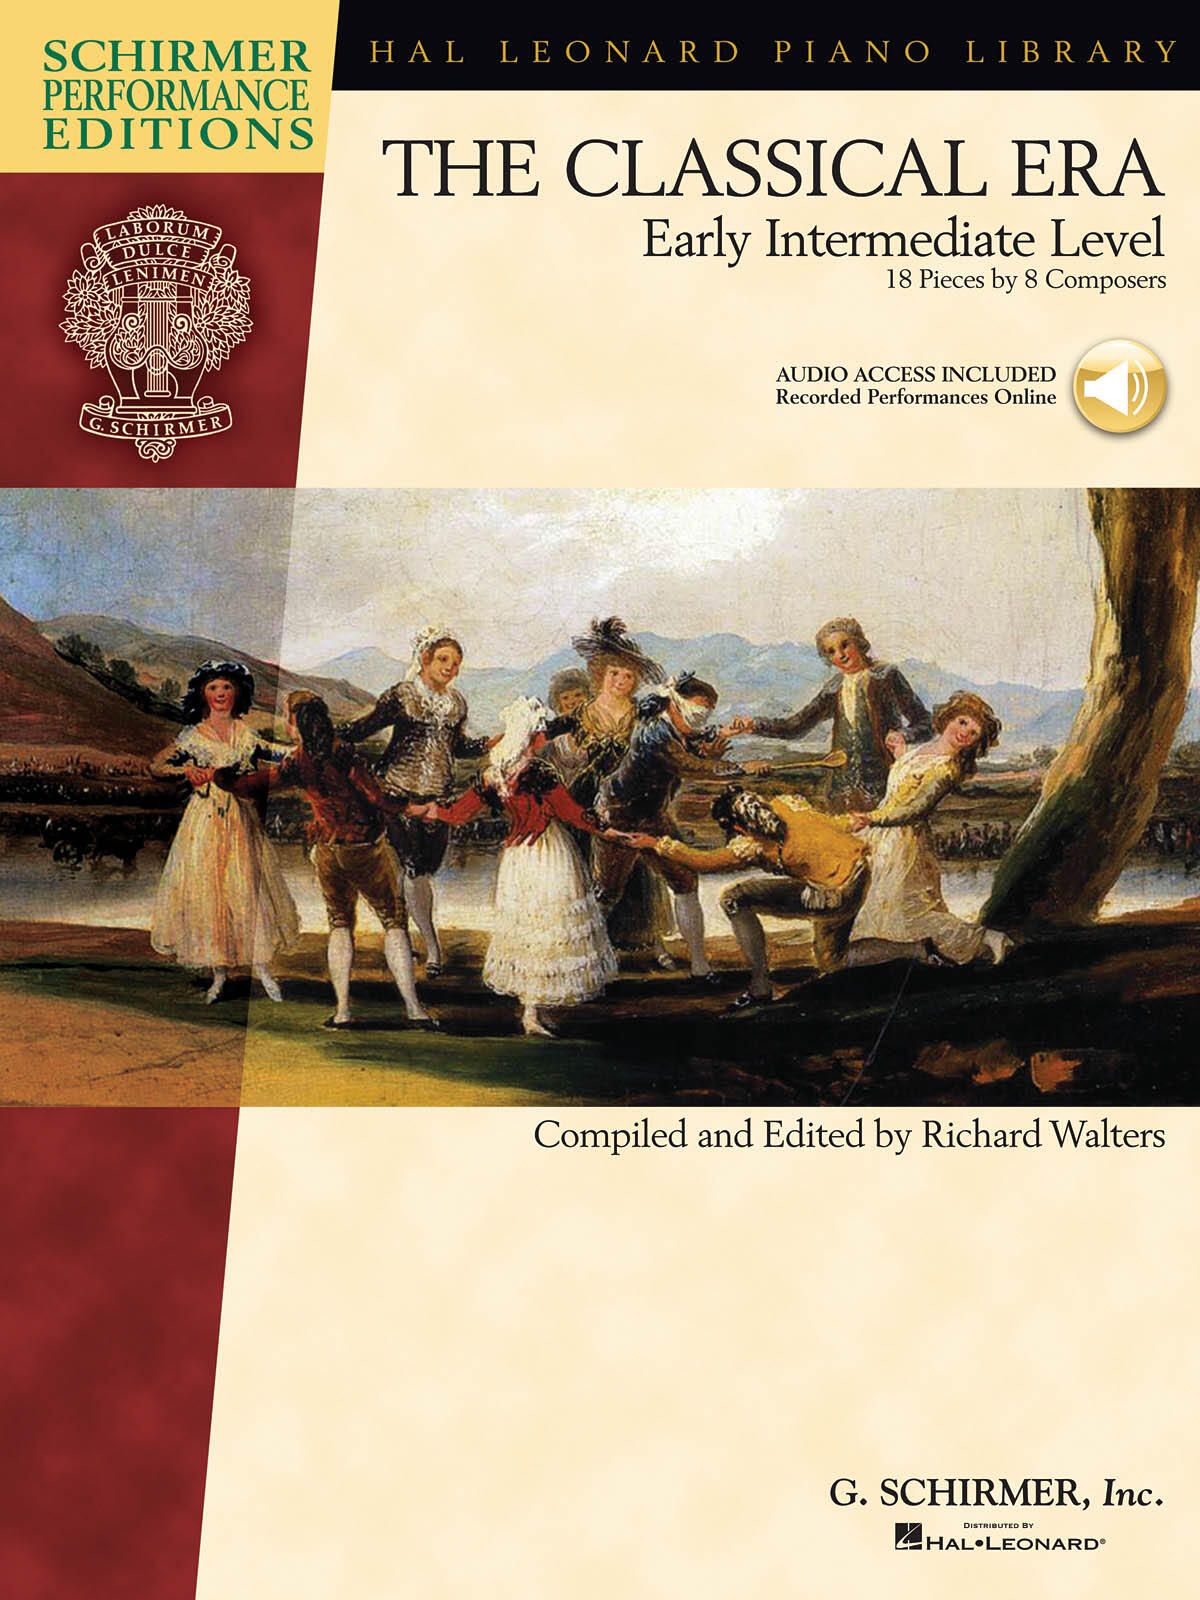 The Classical Era Early Intermediate Level - 18 Pieces by 8 Composers : photo 1